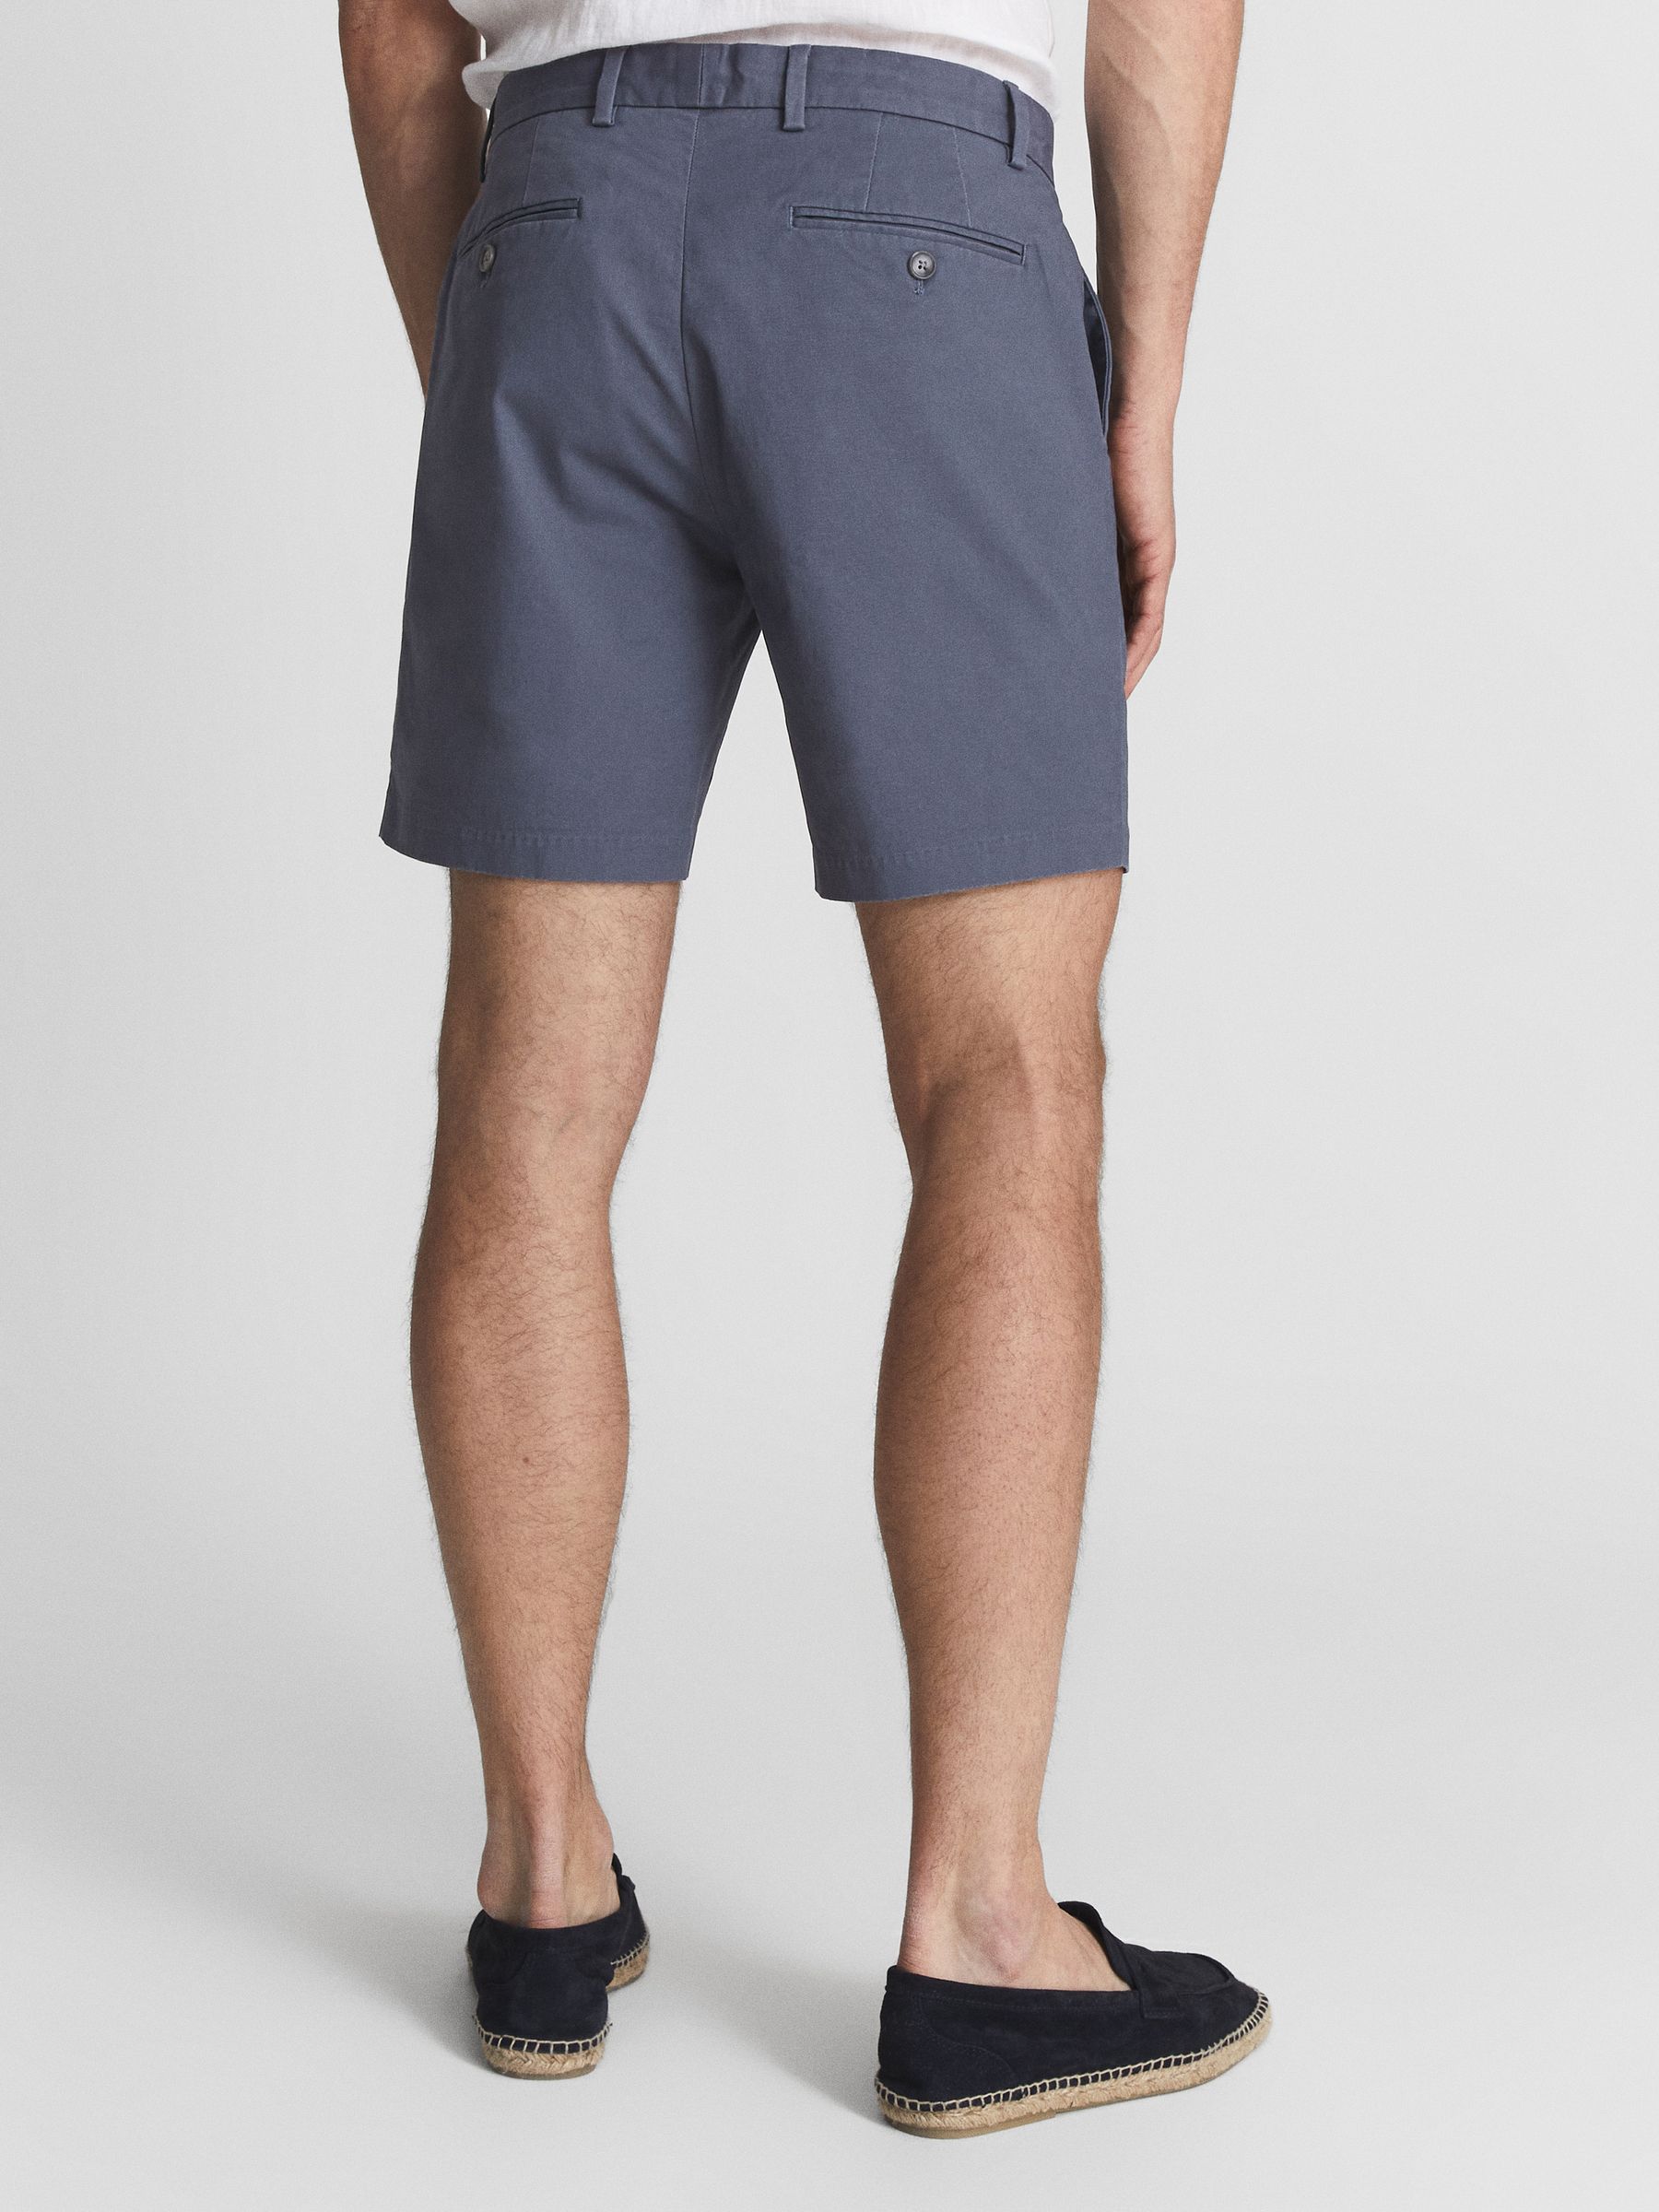 Reiss Wicket Short Length Casual Chino Shorts - REISS